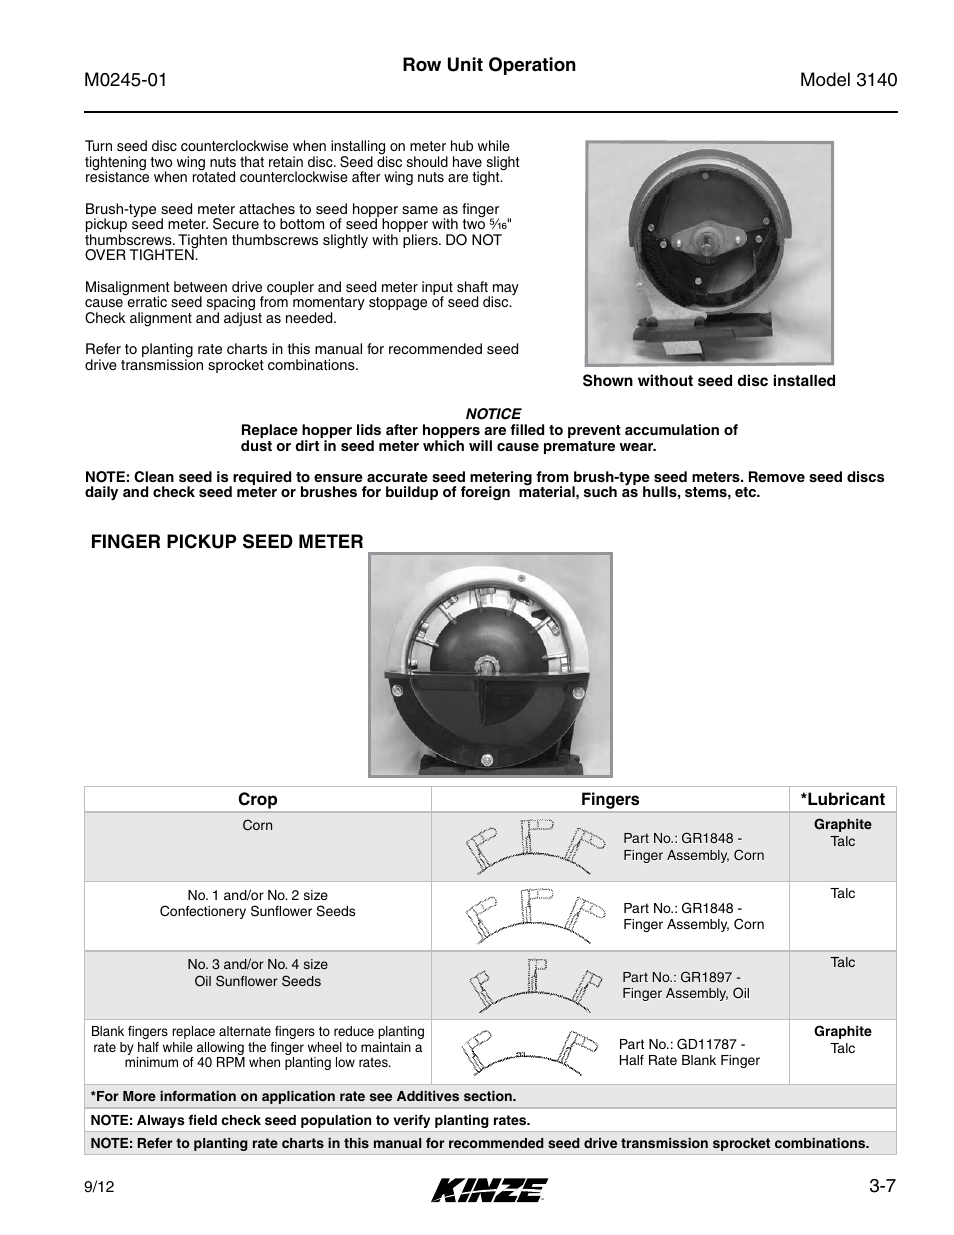 Finger pickup seed meter, Finger pickup seed meter -7, 7 row unit operation | Kinze 3140 Stack Fold Planter Rev. 7/14 User Manual | Page 45 / 150